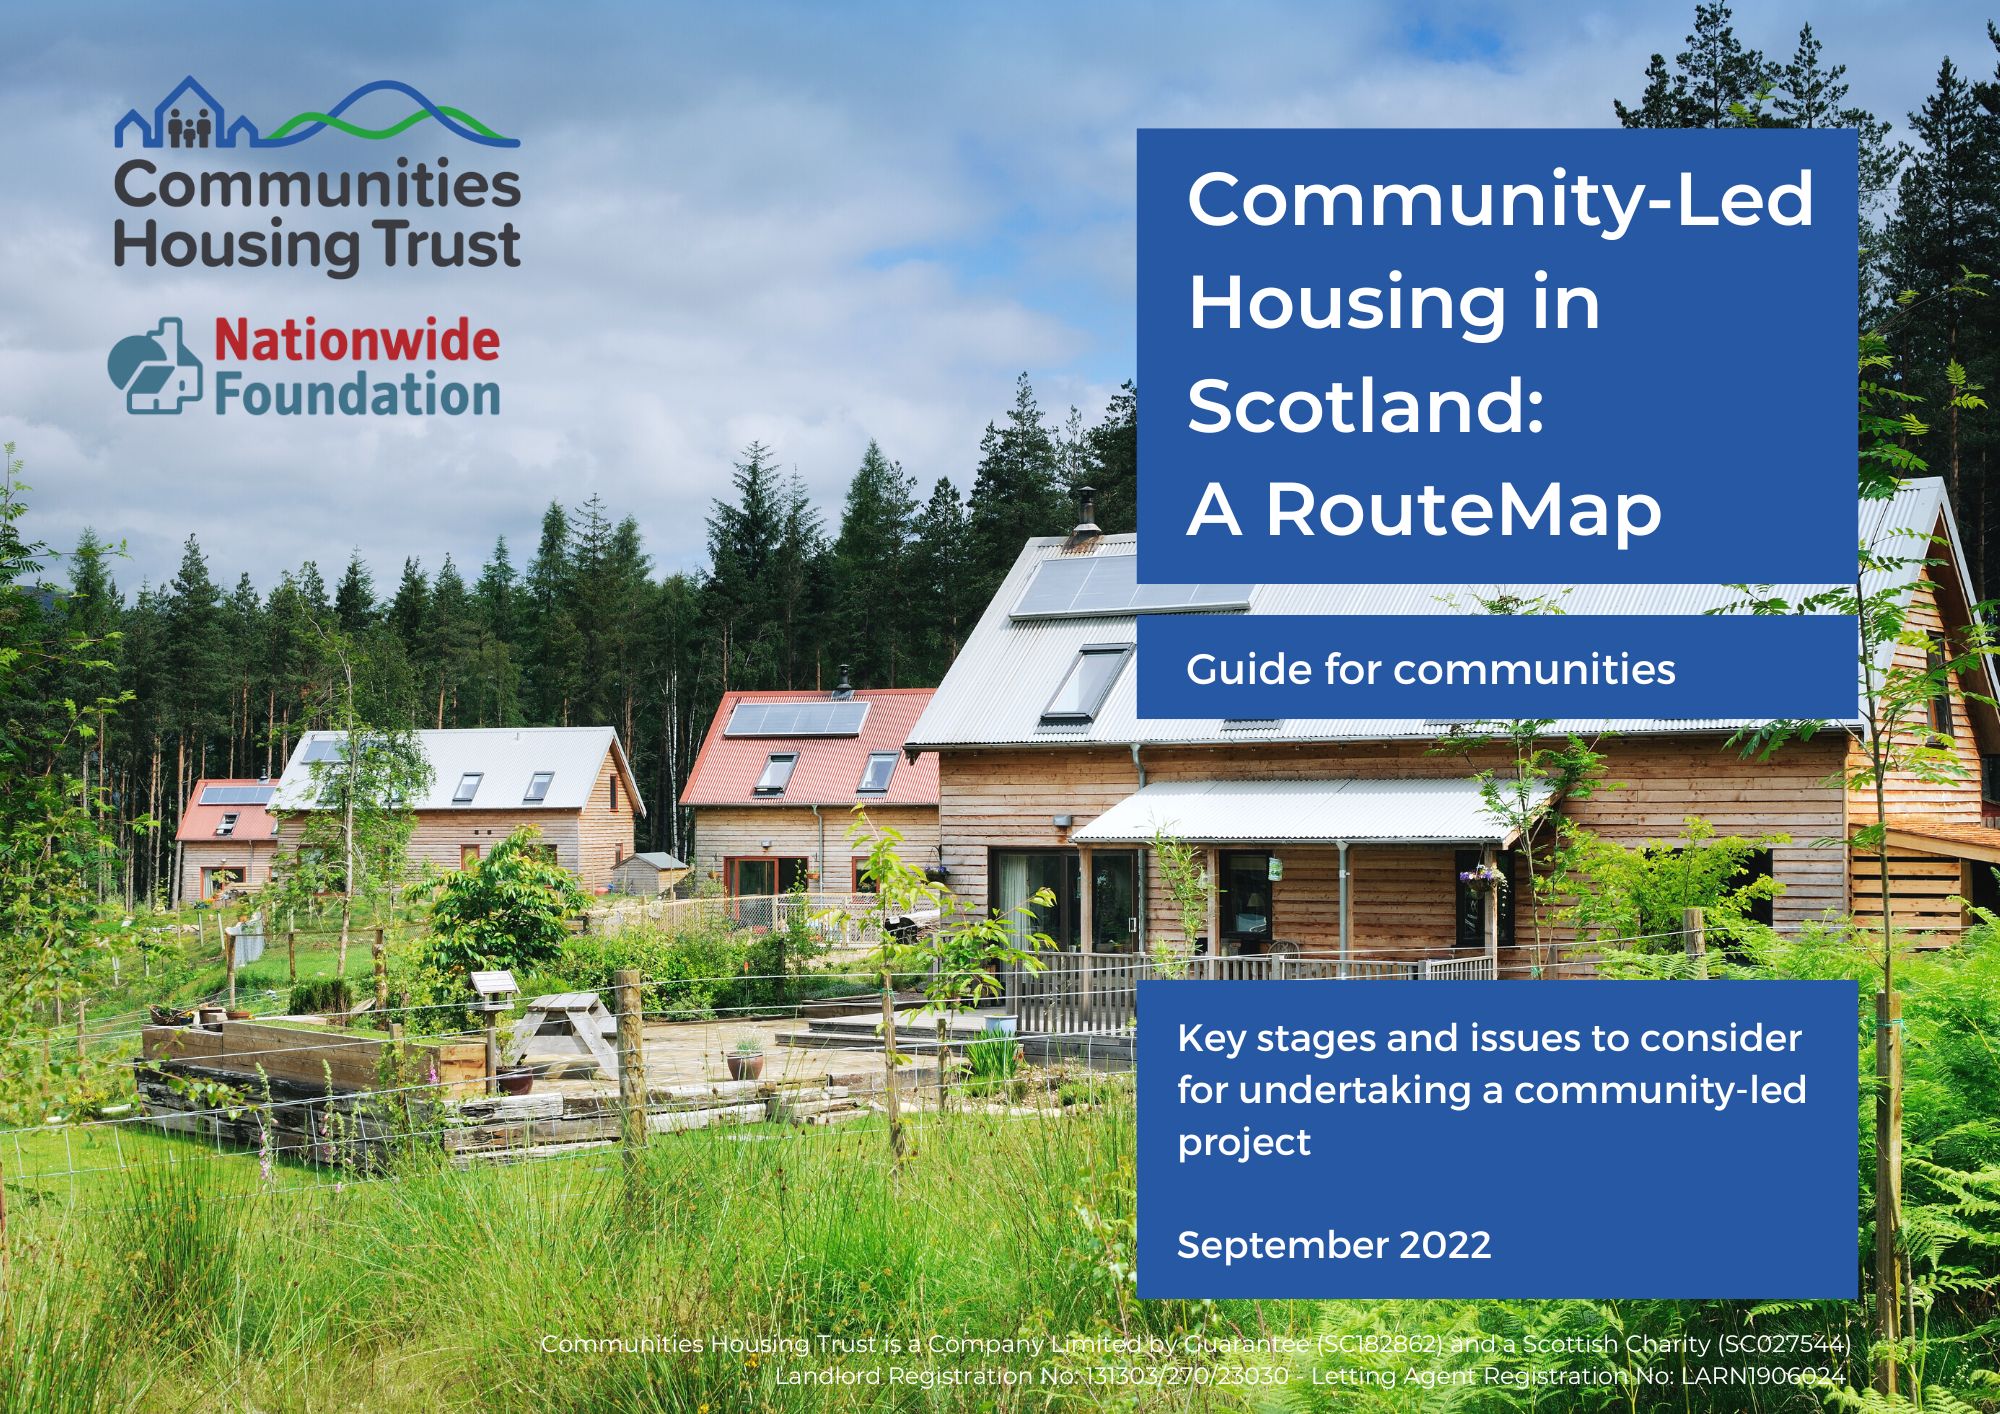 First guide on community-led housing in Scotland unveiled